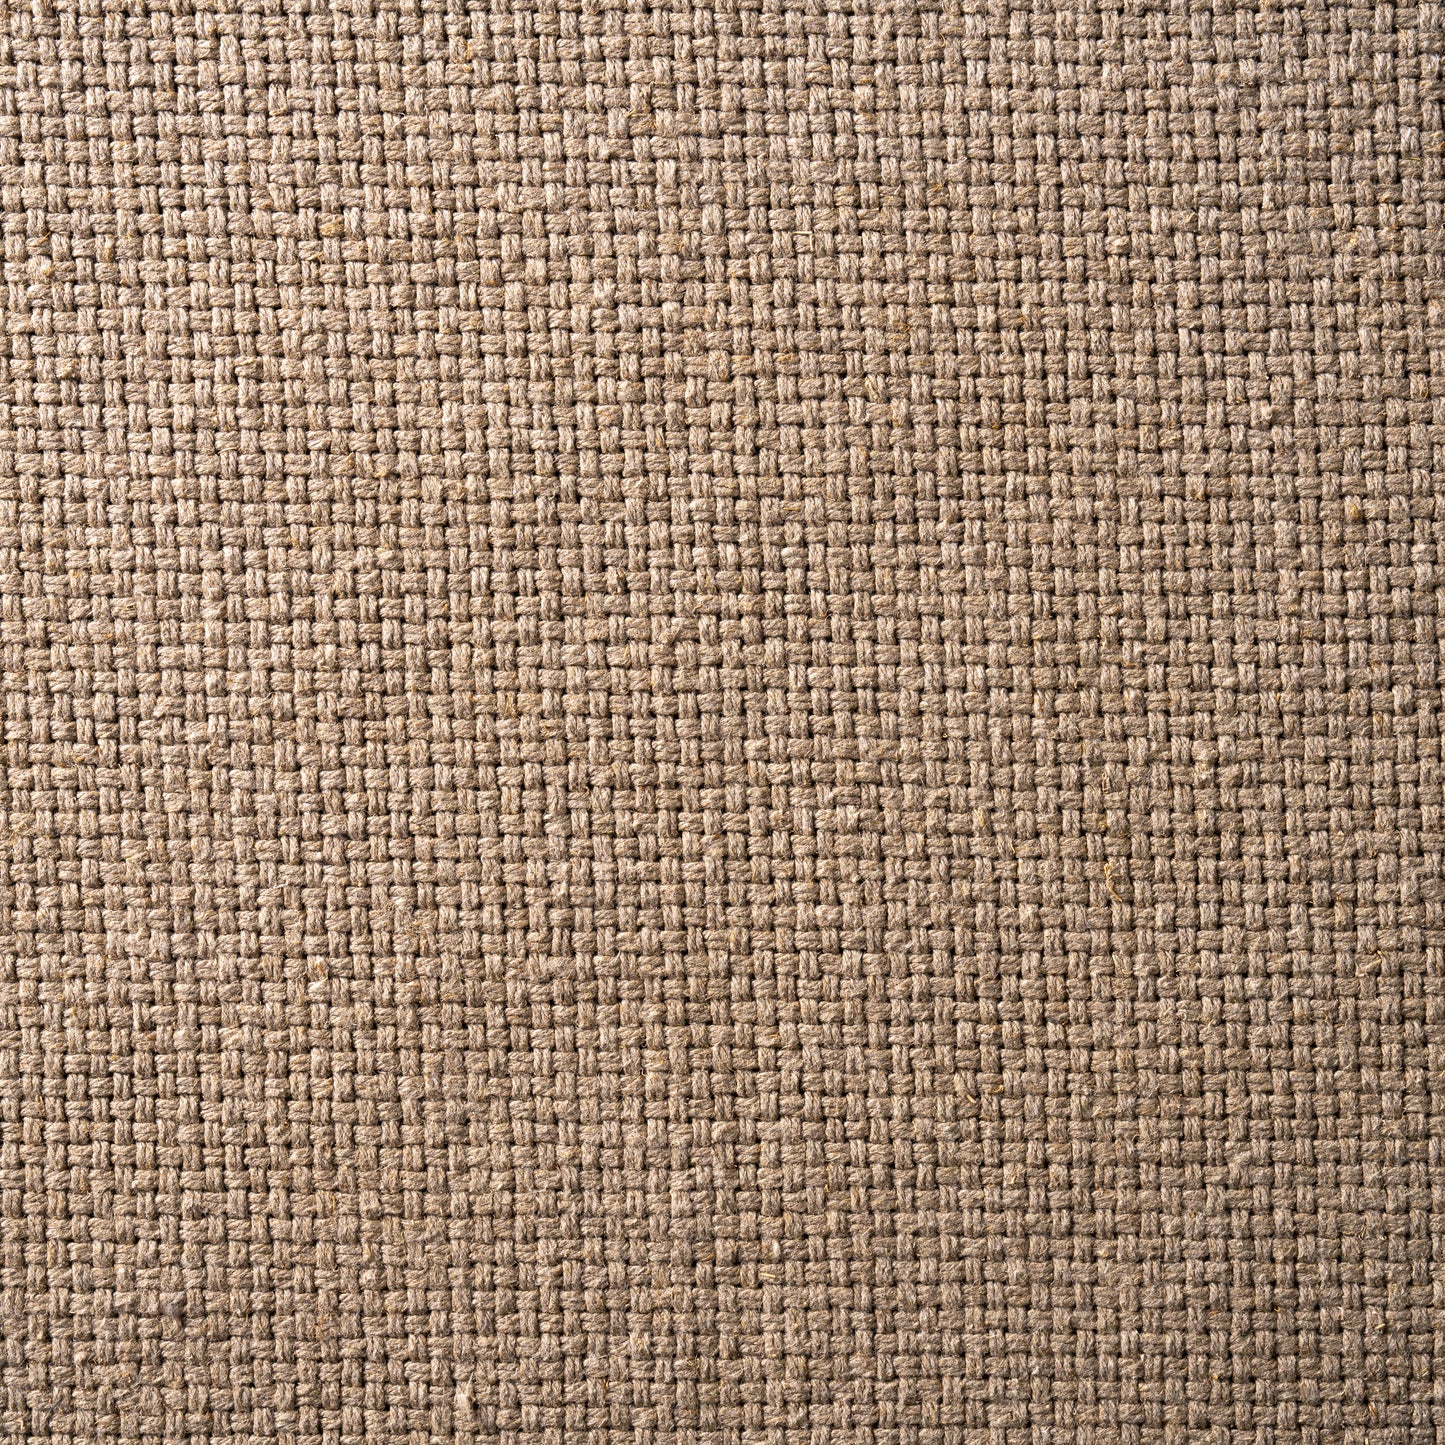 Upholstery Weight 100% Linen (12.5 oz/square yard) Natural Basket Weave